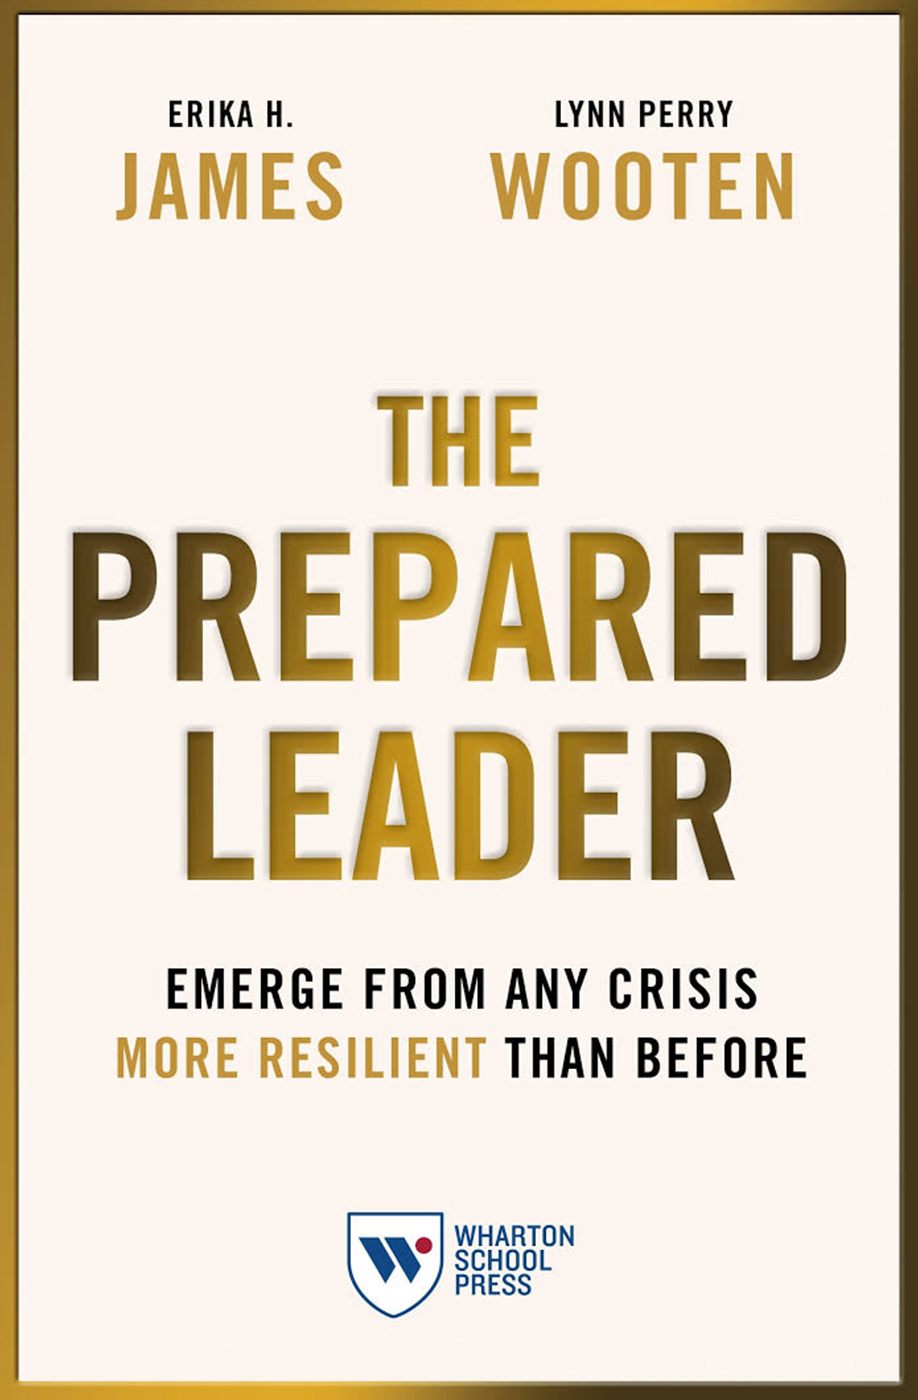 The Prepared Leader: Emerge From Any Crisis More Resilient Than Before by Erika H. James and Lynn Perry Wooten